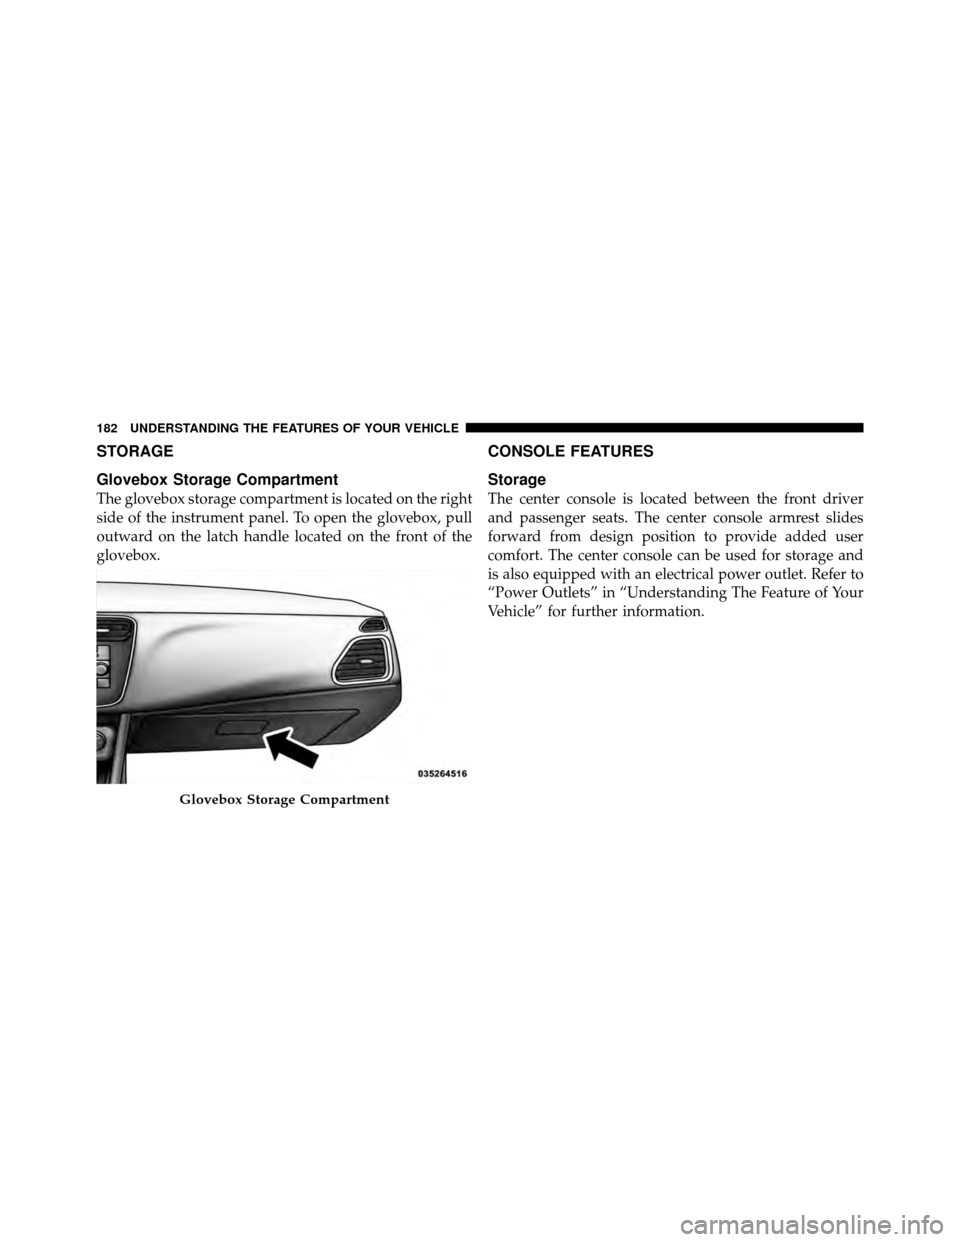 CHRYSLER 200 2012 1.G Owners Manual STORAGE
Glovebox Storage Compartment
The glovebox storage compartment is located on the right
side of the instrument panel. To open the glovebox, pull
outward on the latch handle located on the front 